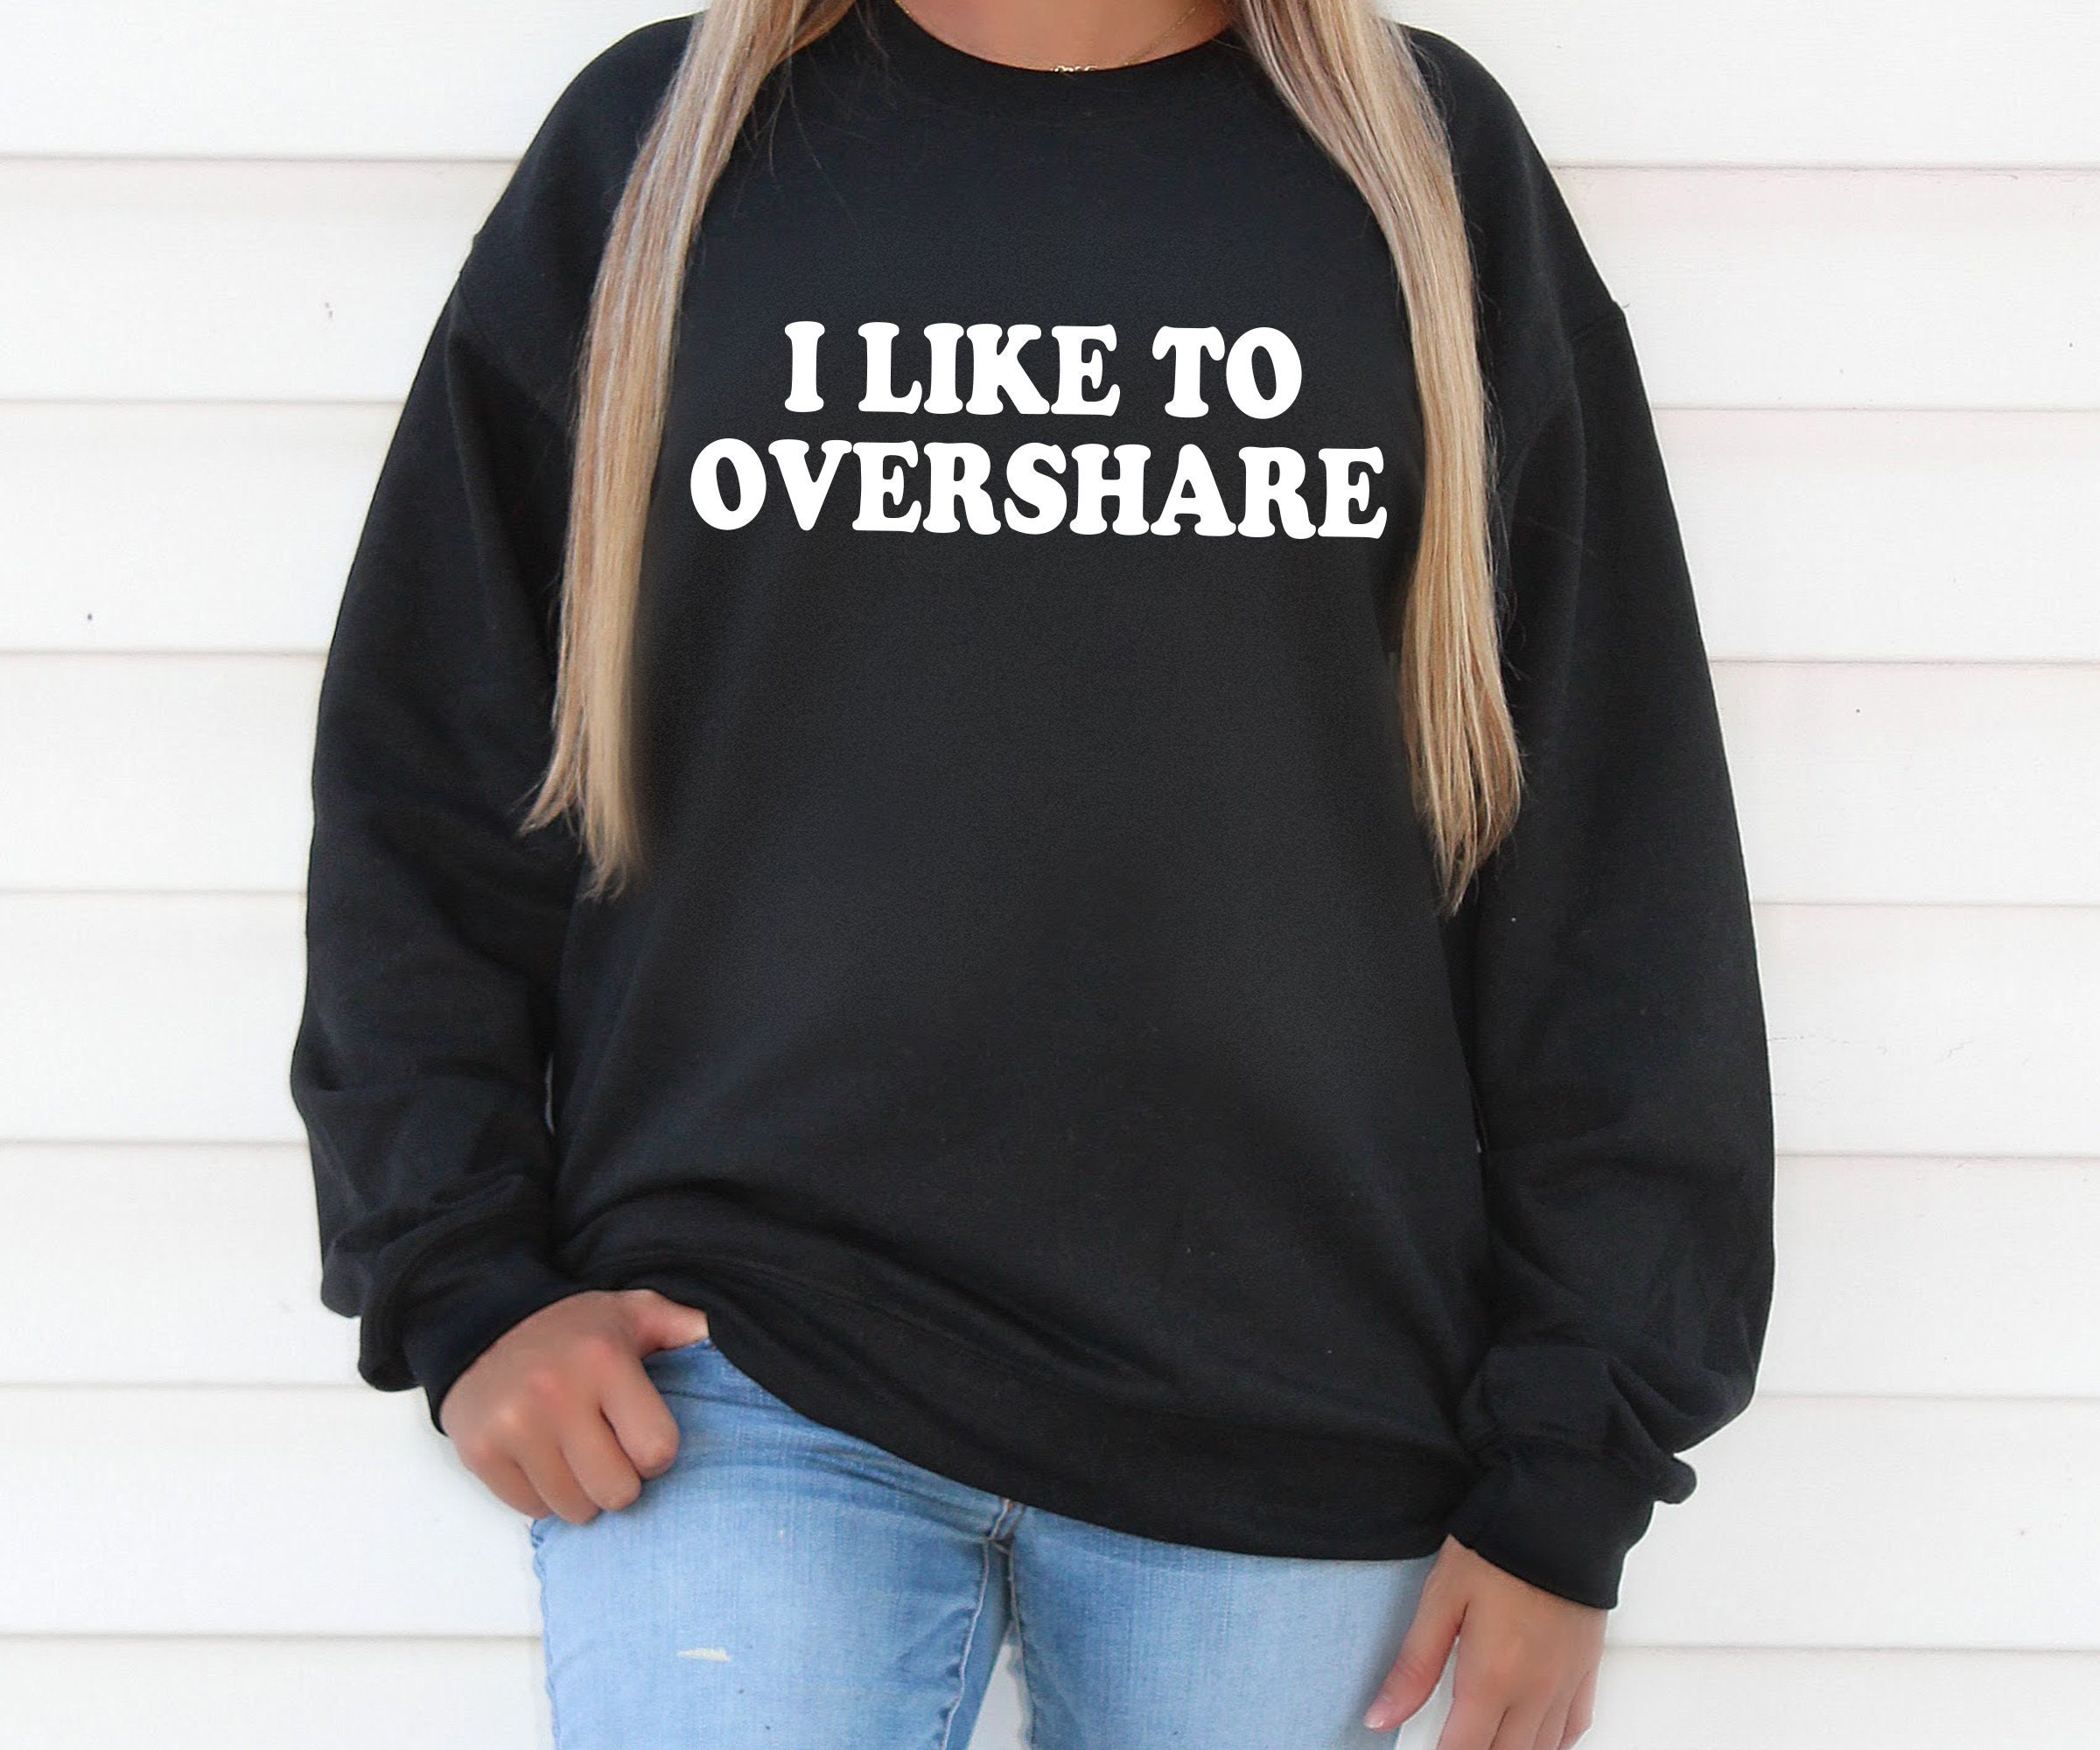 Cute Funny Anxiety Sweaters I Like To Overshare Gift For Best Friend Unisex Sweatshirt Super Soft